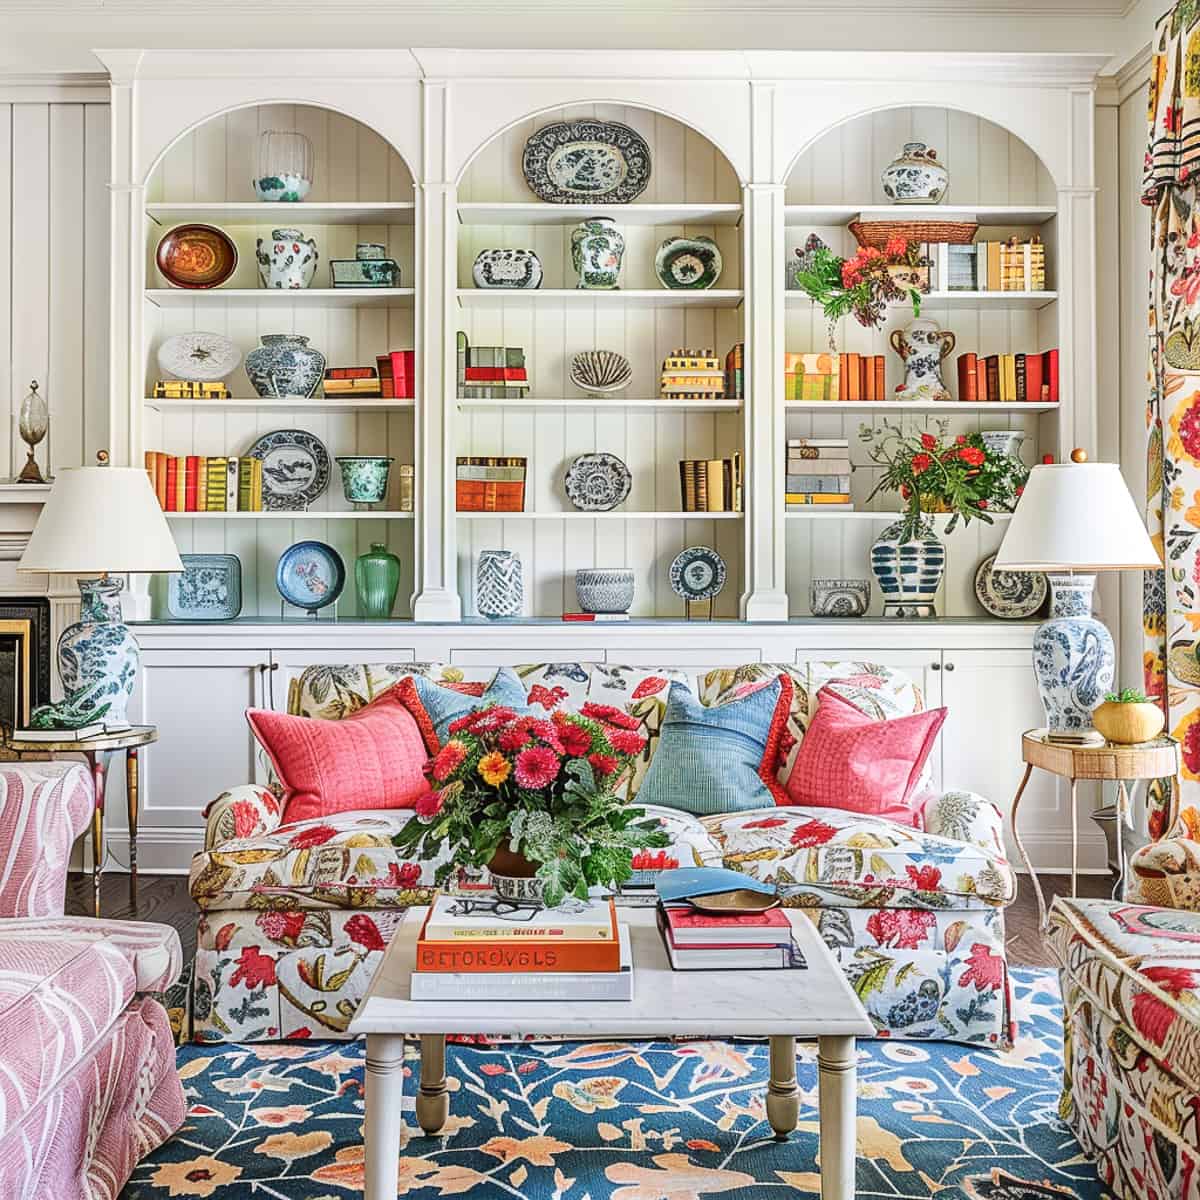 floral upholstered couch and a pair of lamps in front of built-in white shelves in a living room decorated with colorful, traditional living room type accessories